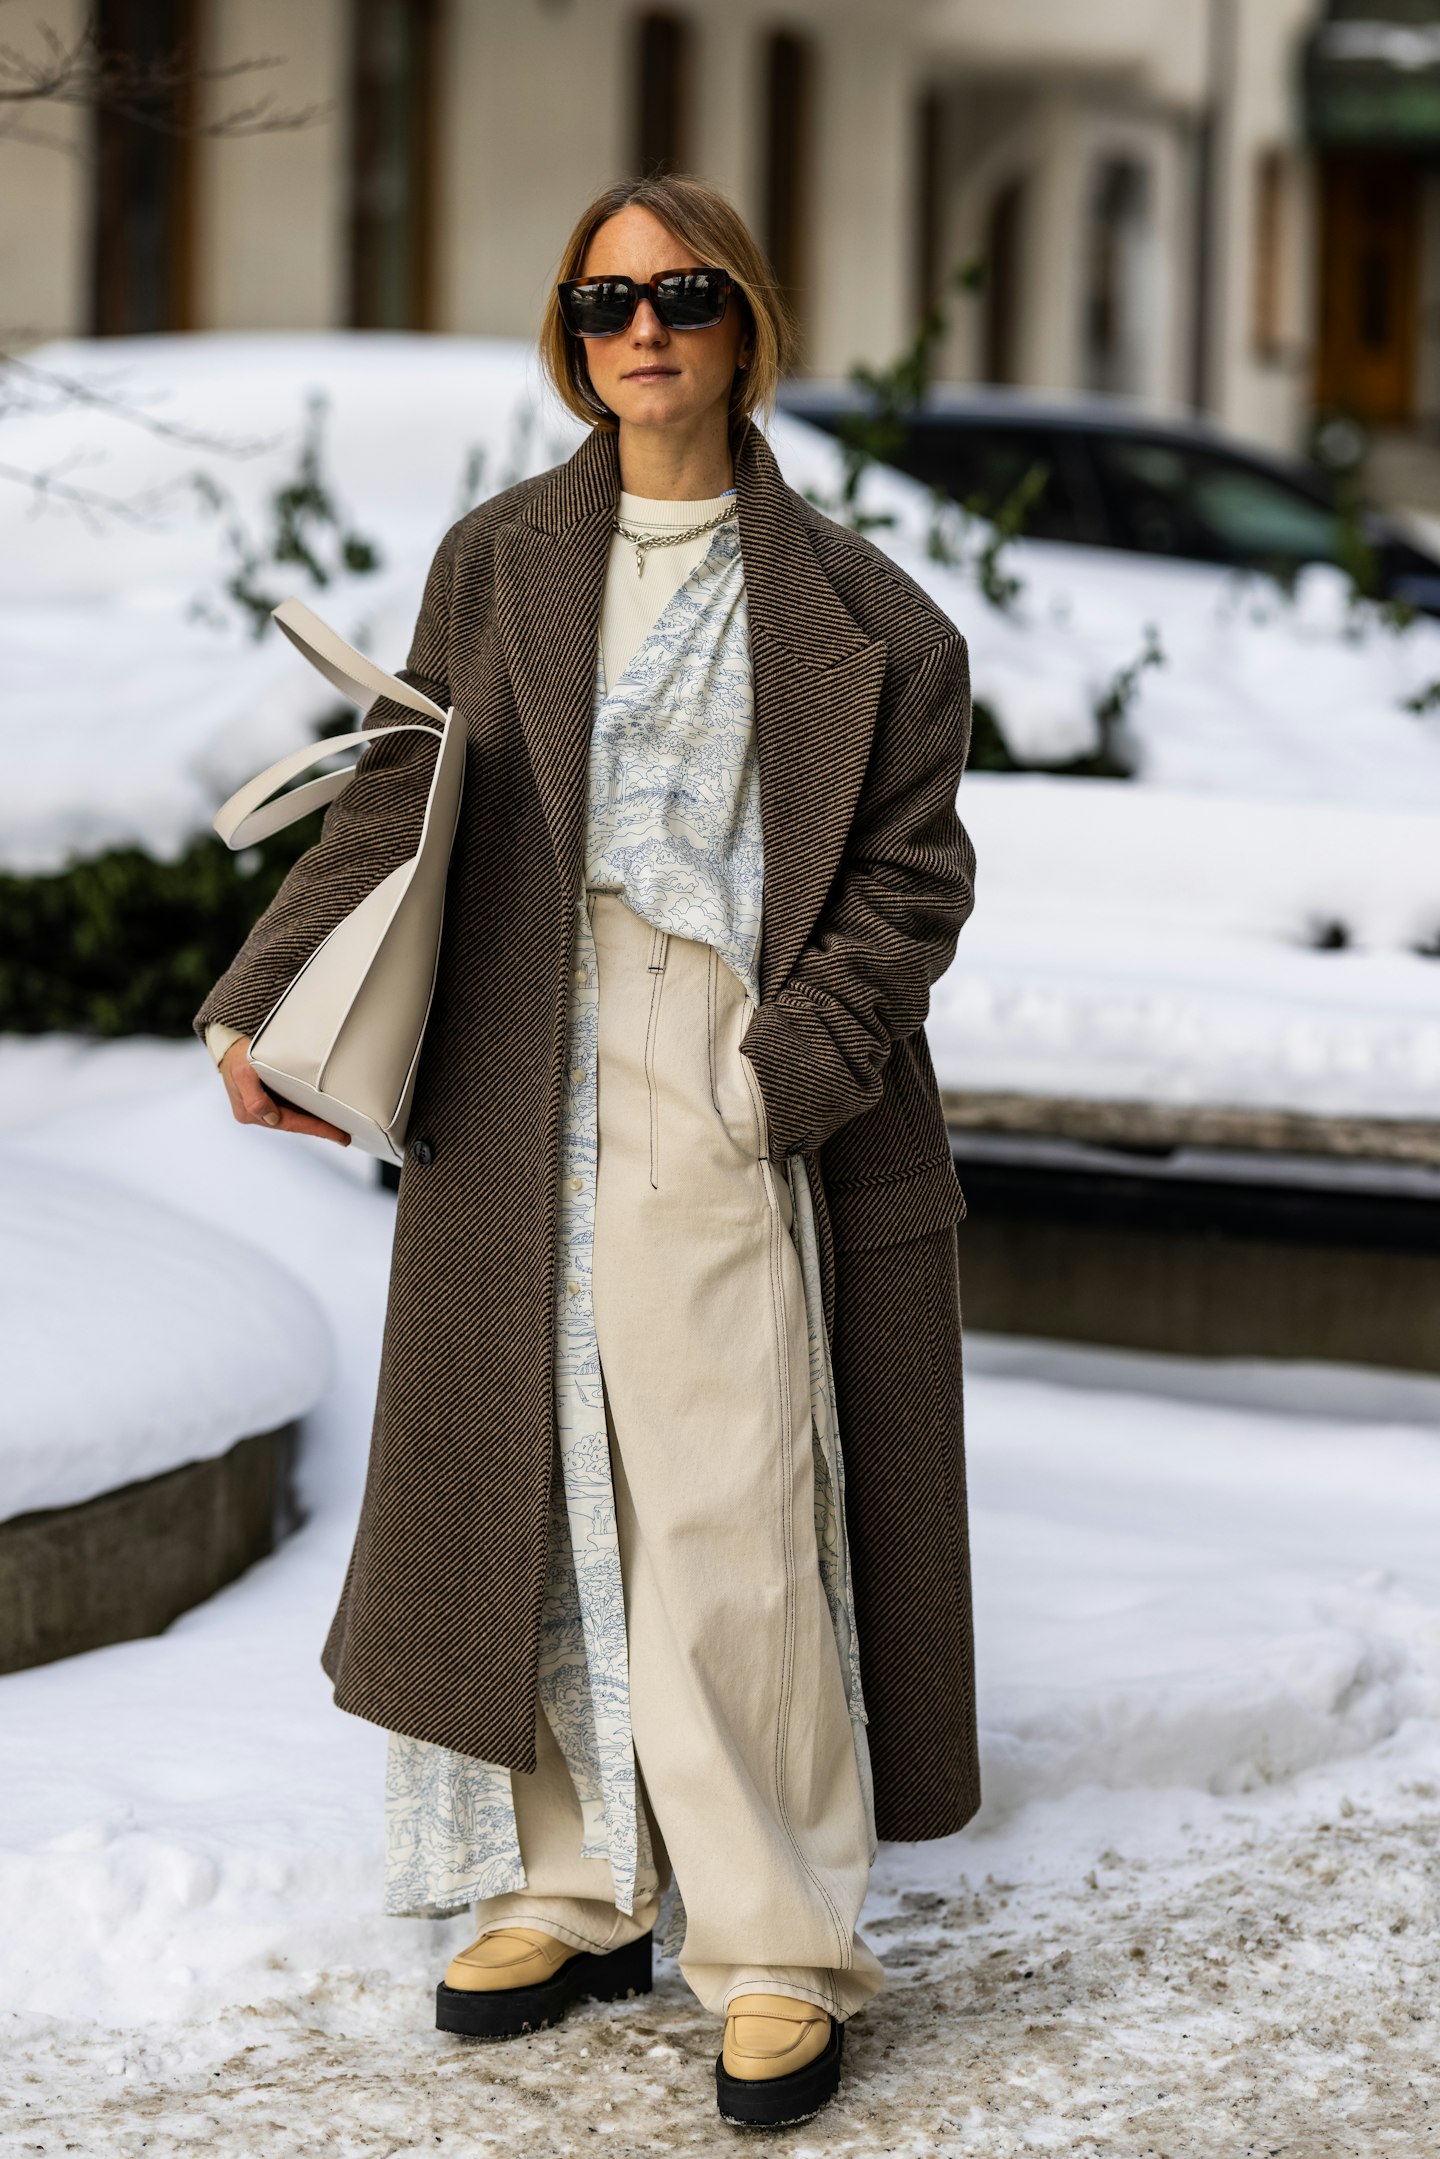 Stockholm Fashion Week Street Style: How To Dress For Cold Weather